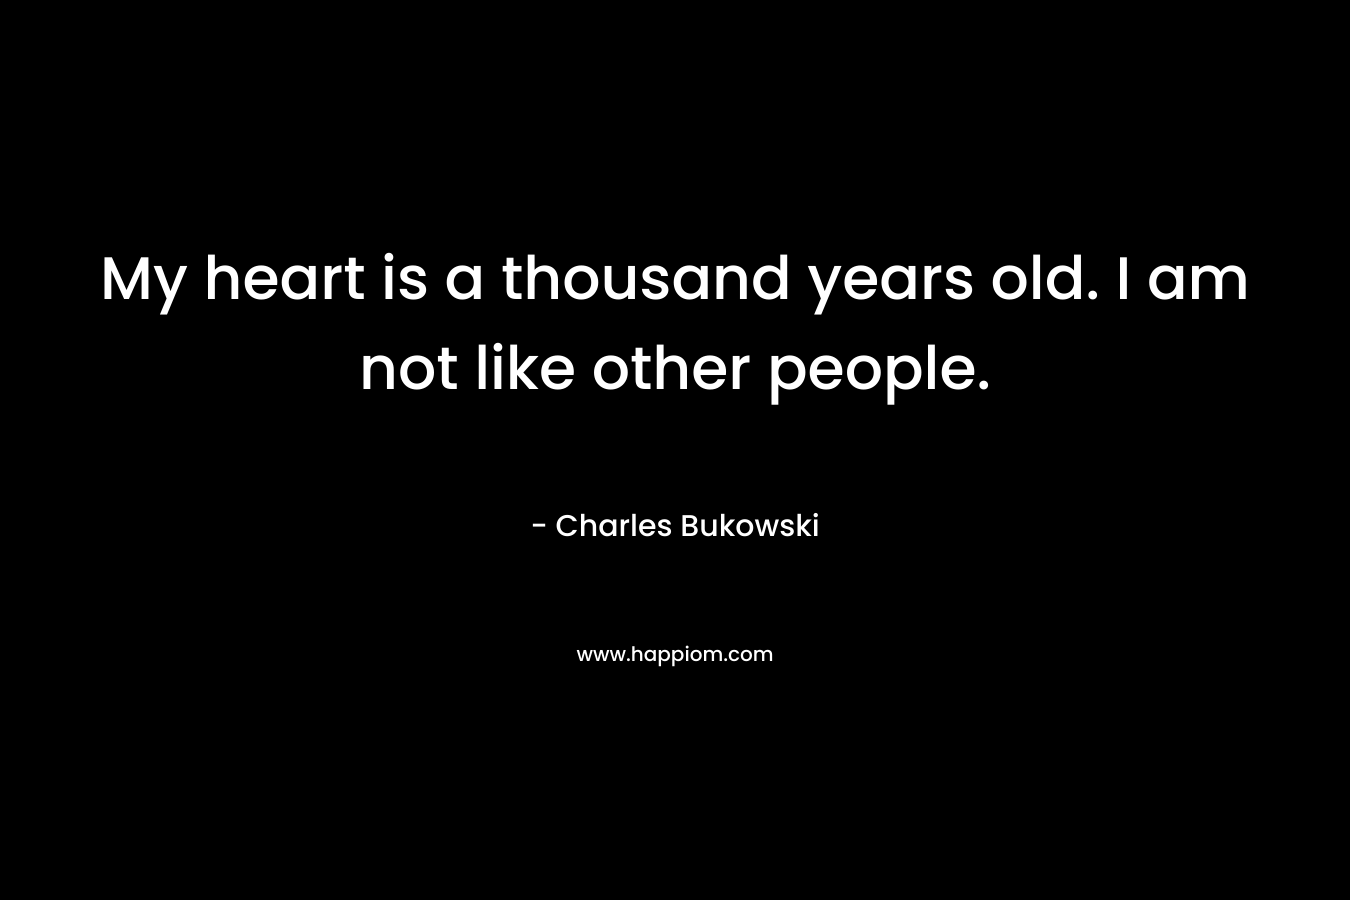 My heart is a thousand years old. I am not like other people. – Charles Bukowski